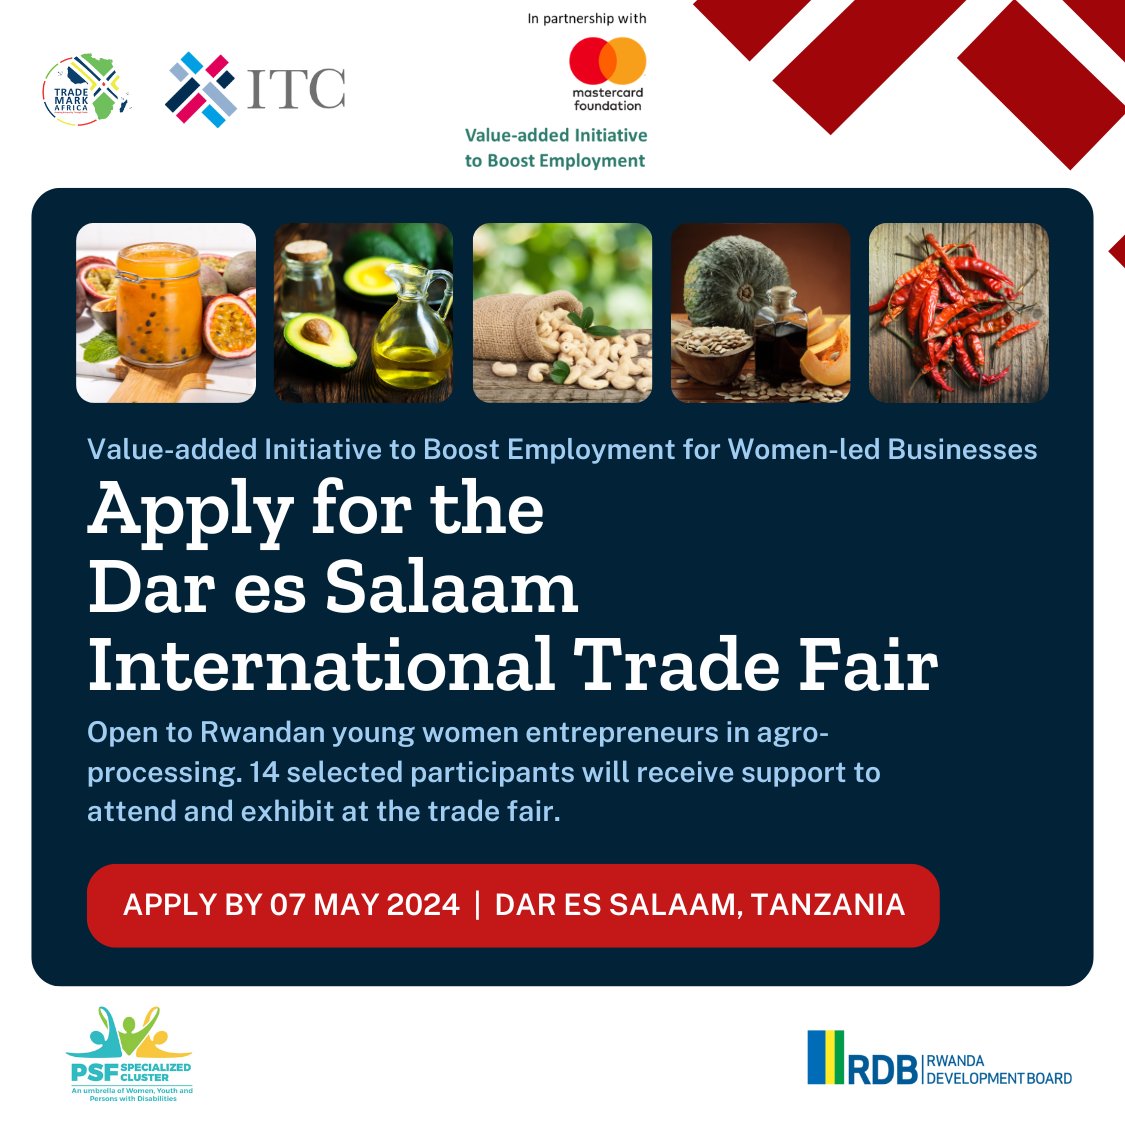 Calling Rwandan young women in agro-processing! 🇷🇼 ITC, in collaboration with @RDBrwanda & #SheTrades 🇷🇼Hub (@PSF_Specialized), is supporting 14 women to participate in the Dar es Salaam International Trade Fair (DITF) in Tanzania 🇹🇿. 🔗Apply by 7 May: tinyurl.com/9rfwr794